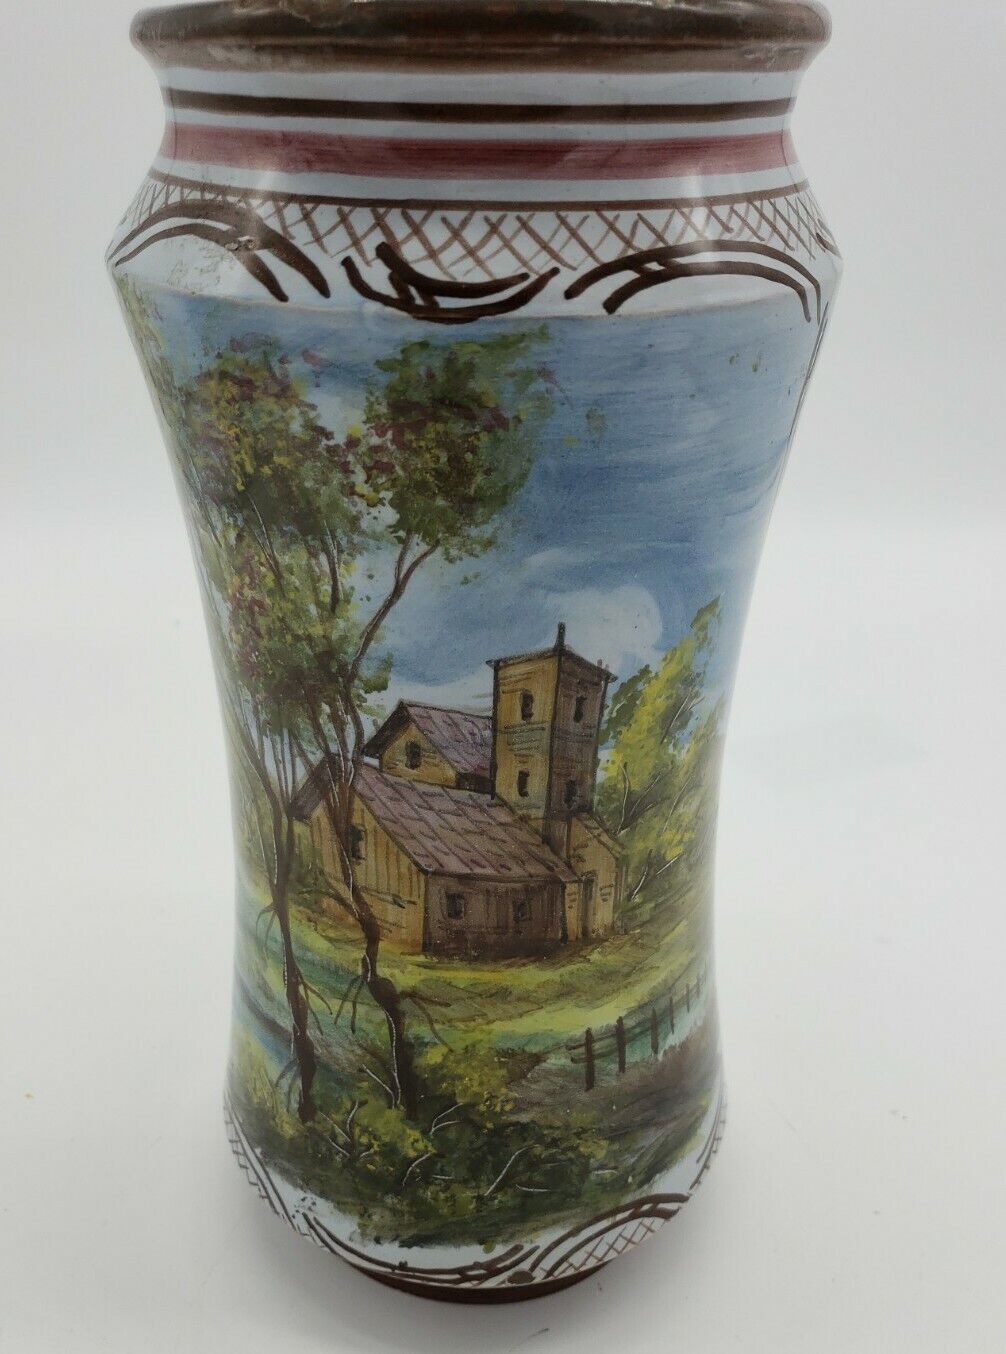 S. Stefano Italian Pottery Hand Made & Painted, 11 Inch Vase Outdoor Scene